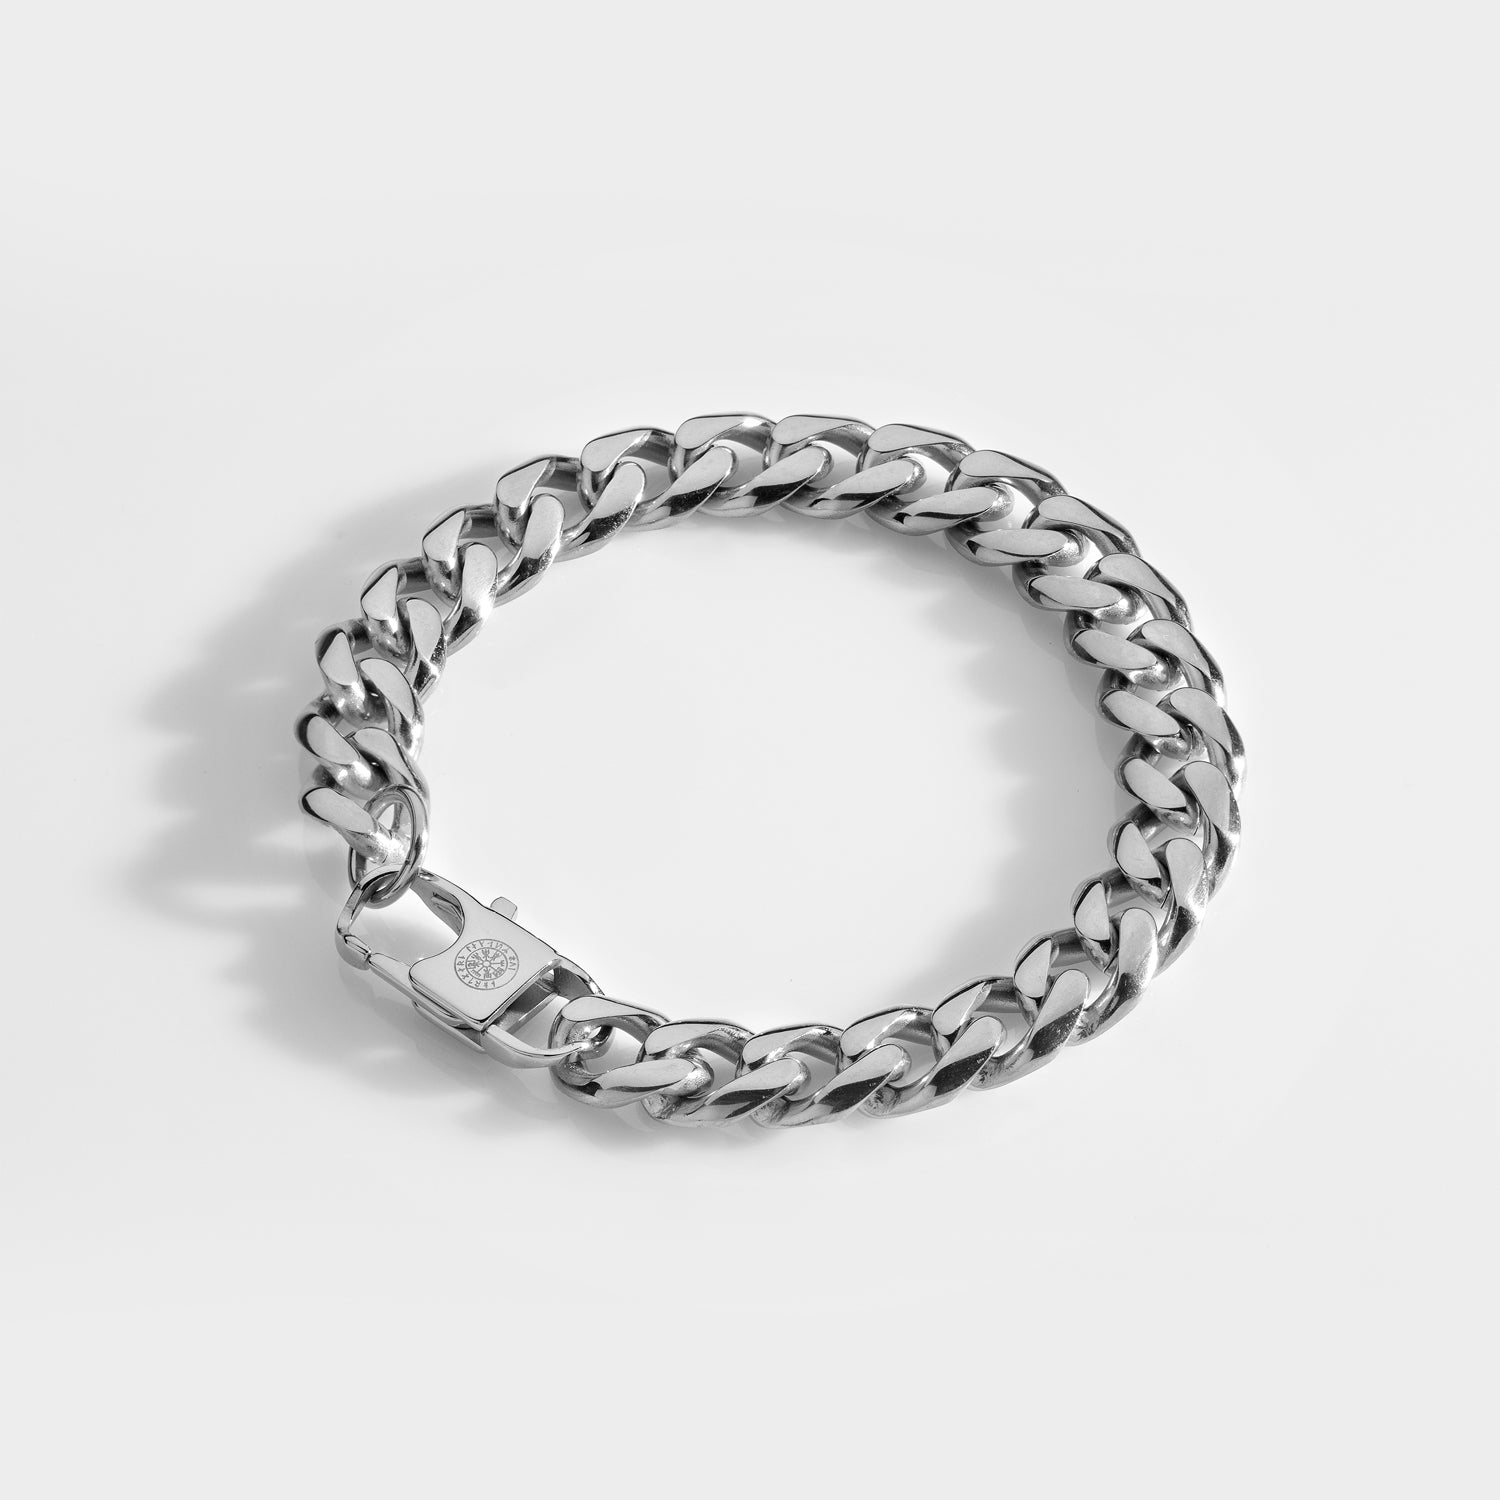 NL Sequence bracelet - Silver-toned